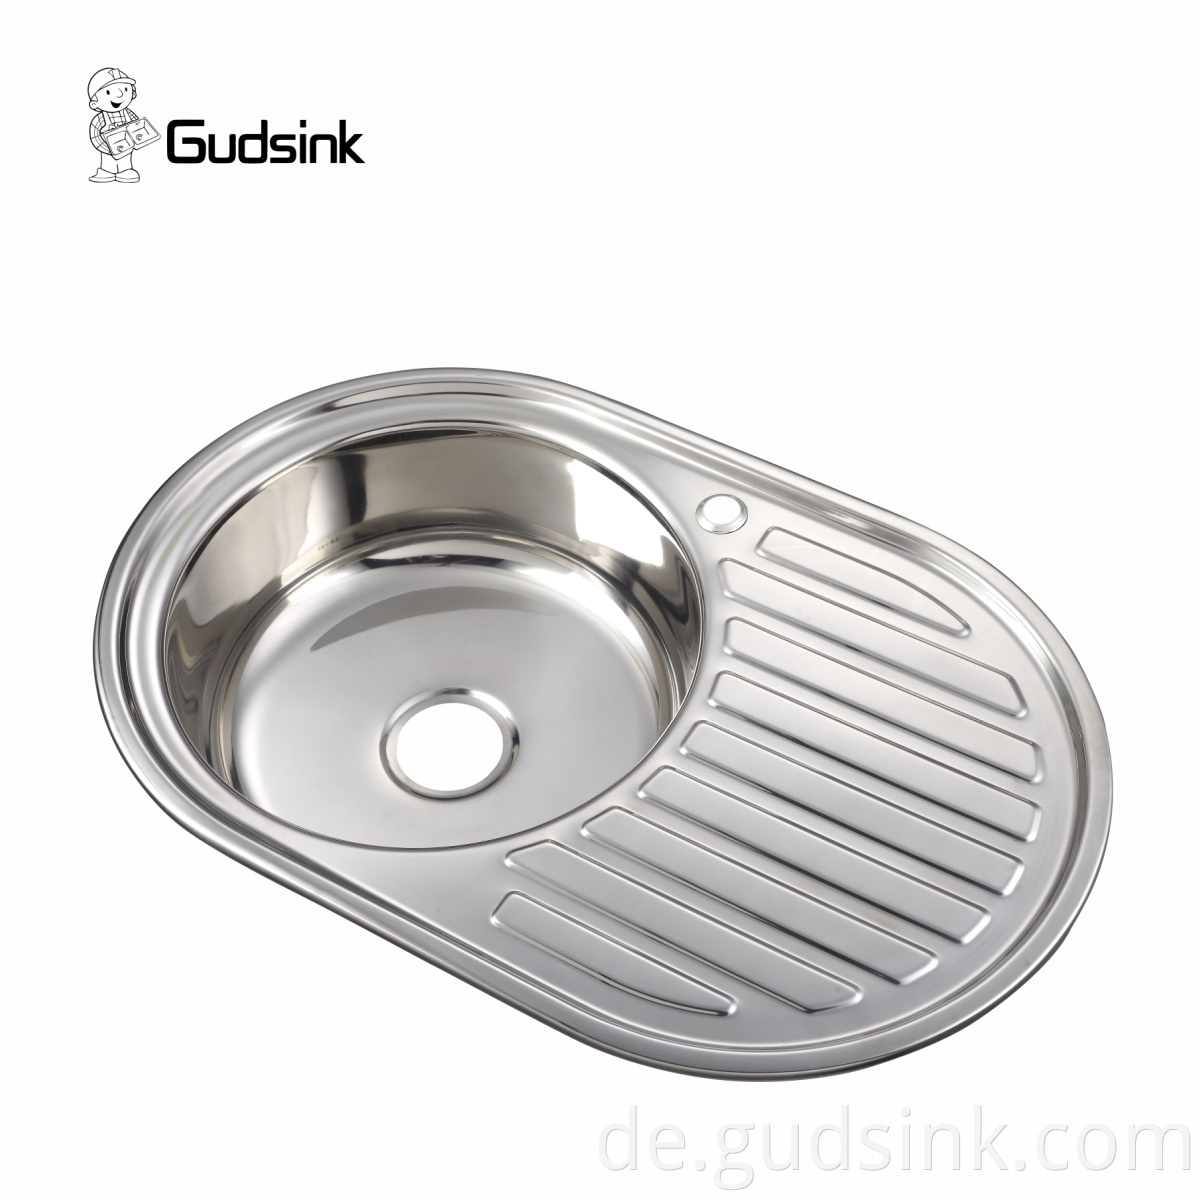 stainless steel sink cabinets